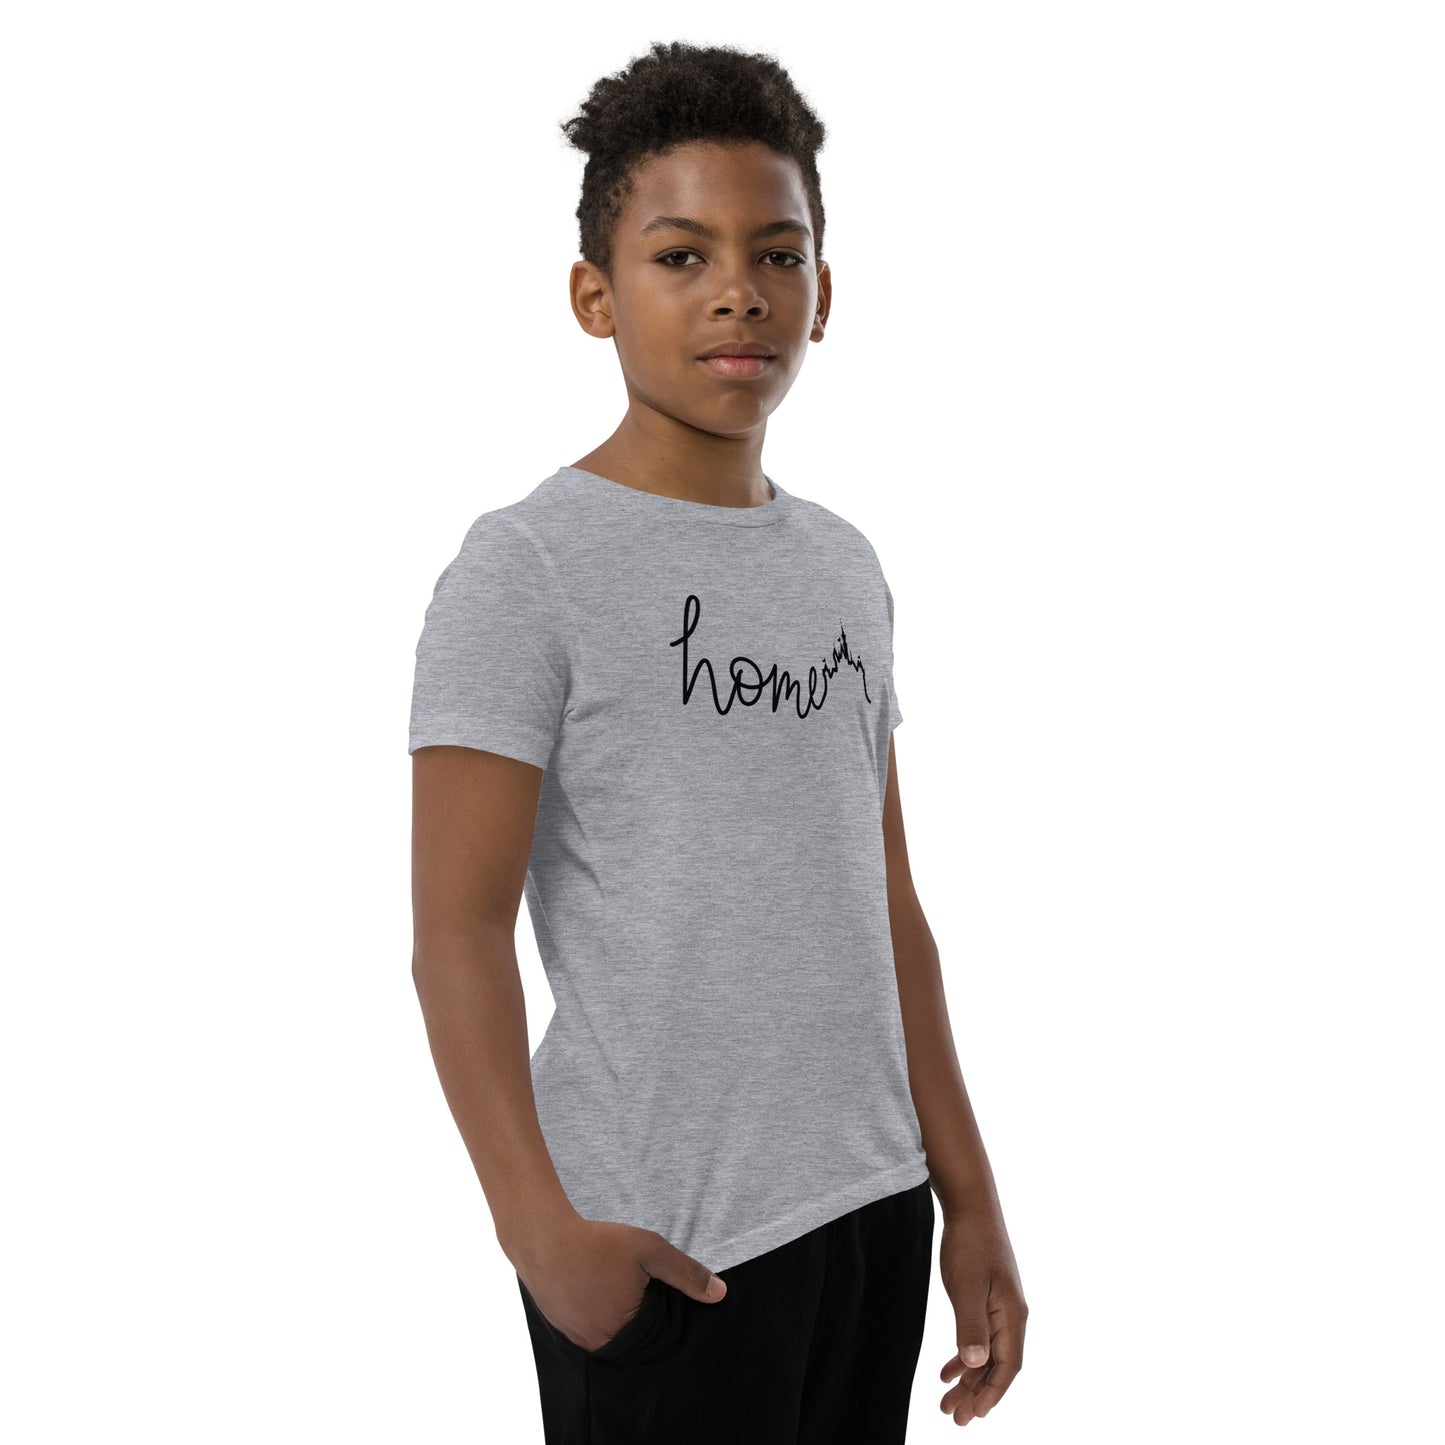 Castle Home West Youth T-Shirt